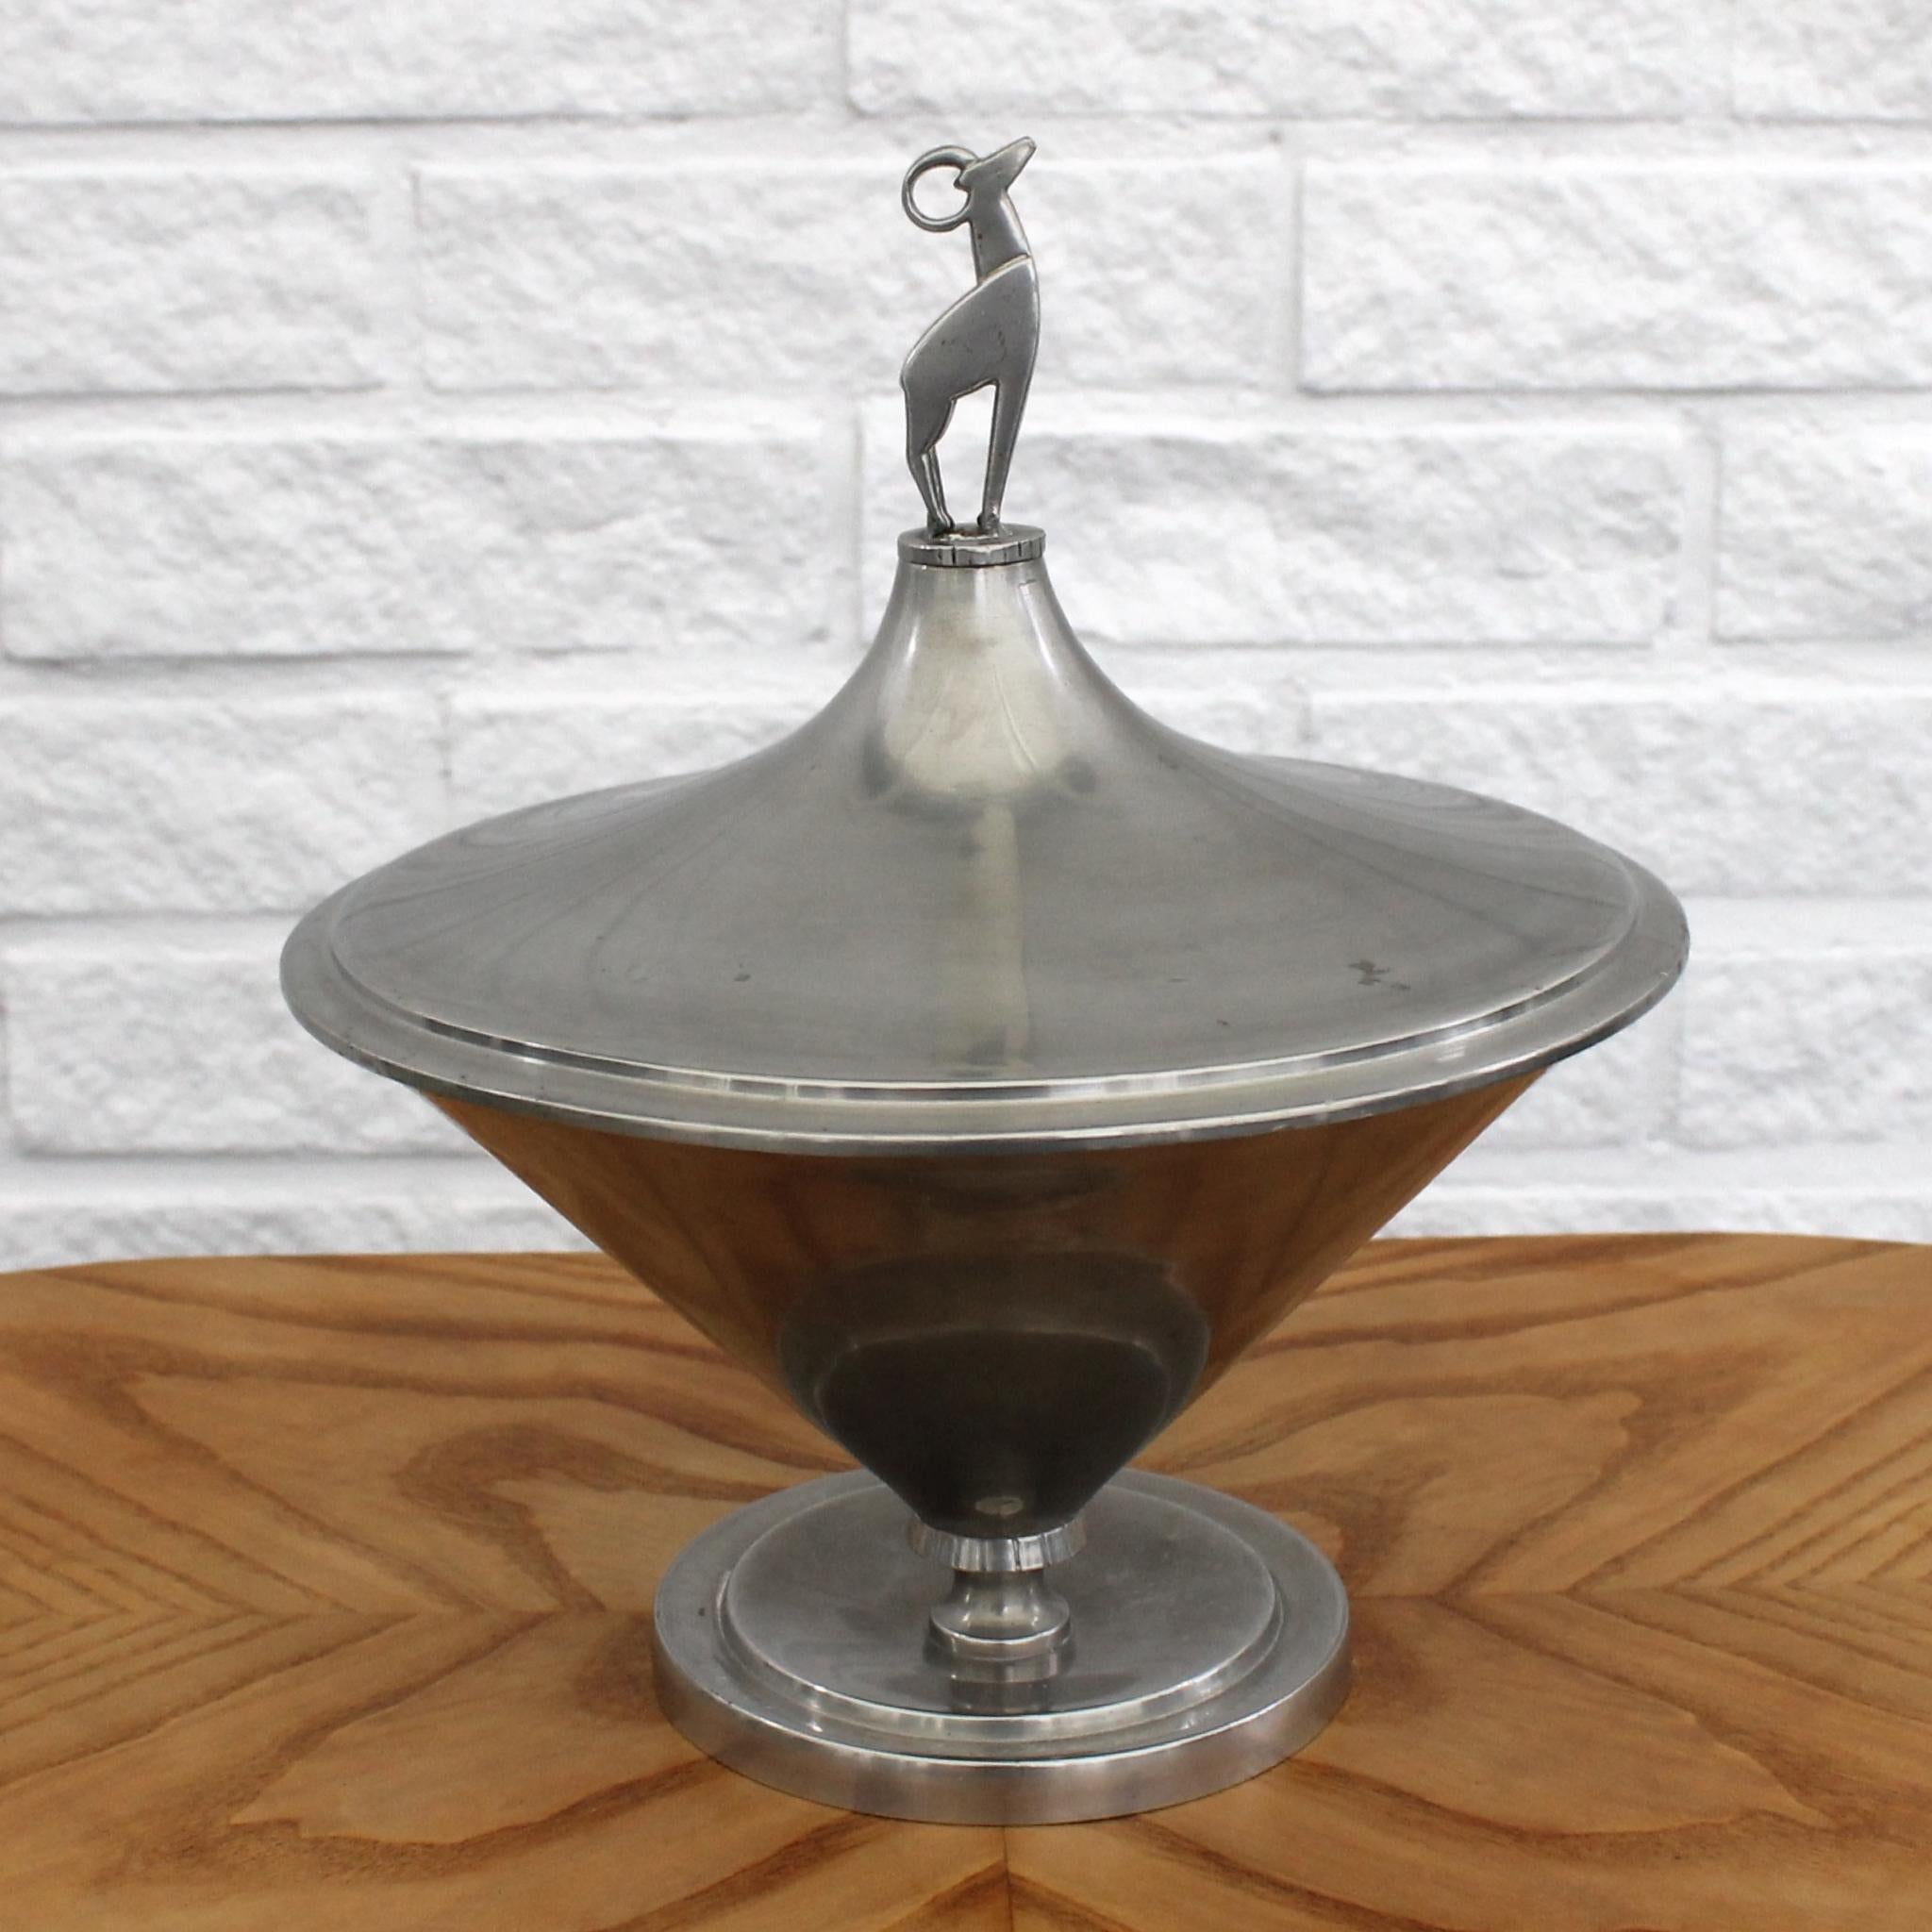 A Swedish art deco pewter bowl with lid, produced by Guldsmedsaktiebolaget GAB in the 1930’s. The lid is elegantly adorned with a decorative deer. Guldsmedsaktiebolaget, or GAB, was established back in 1868 and gained recognition, particularly for